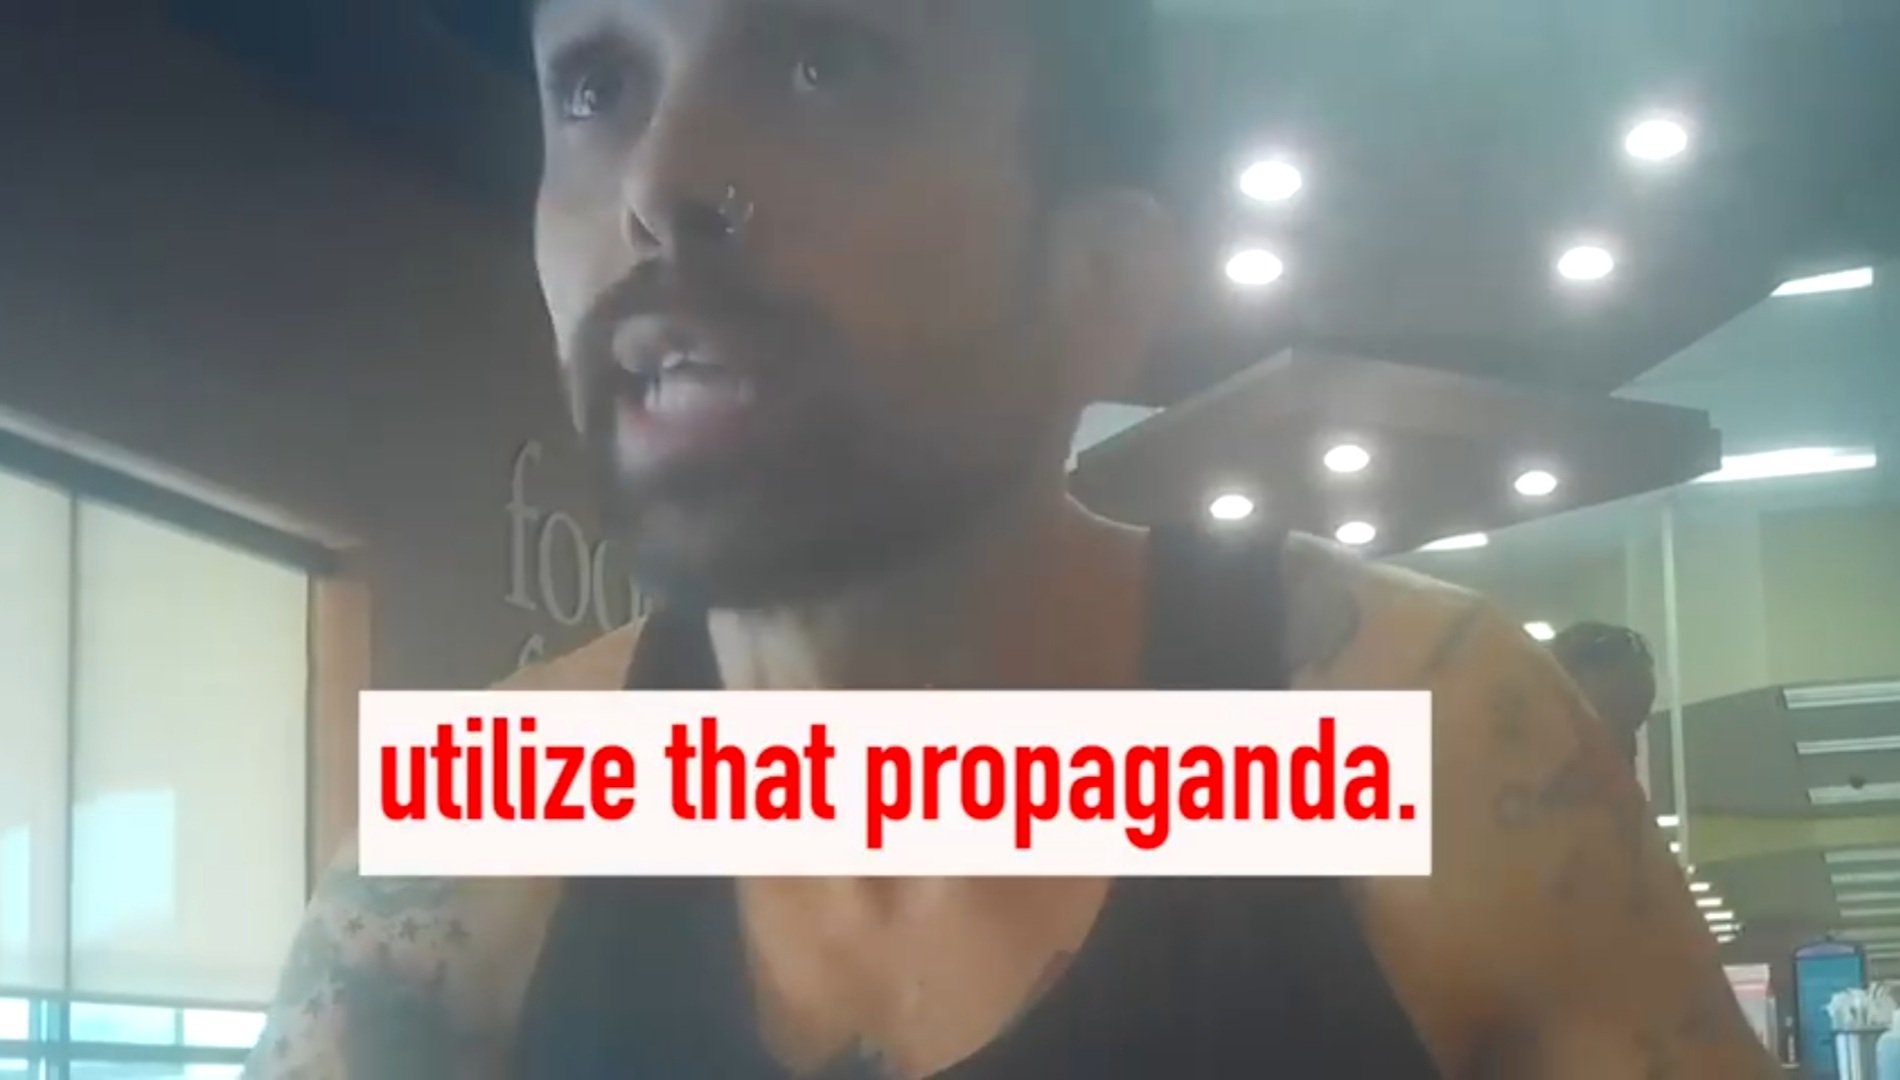 Sacramento High School Teacher CAUGHT on UNDERCOVER VIDEO Bragging About Indoctrinating Students to Become ANTIFA “Revolutionaries;” Views American Children as “Martyrs for a Cause” – (Video)